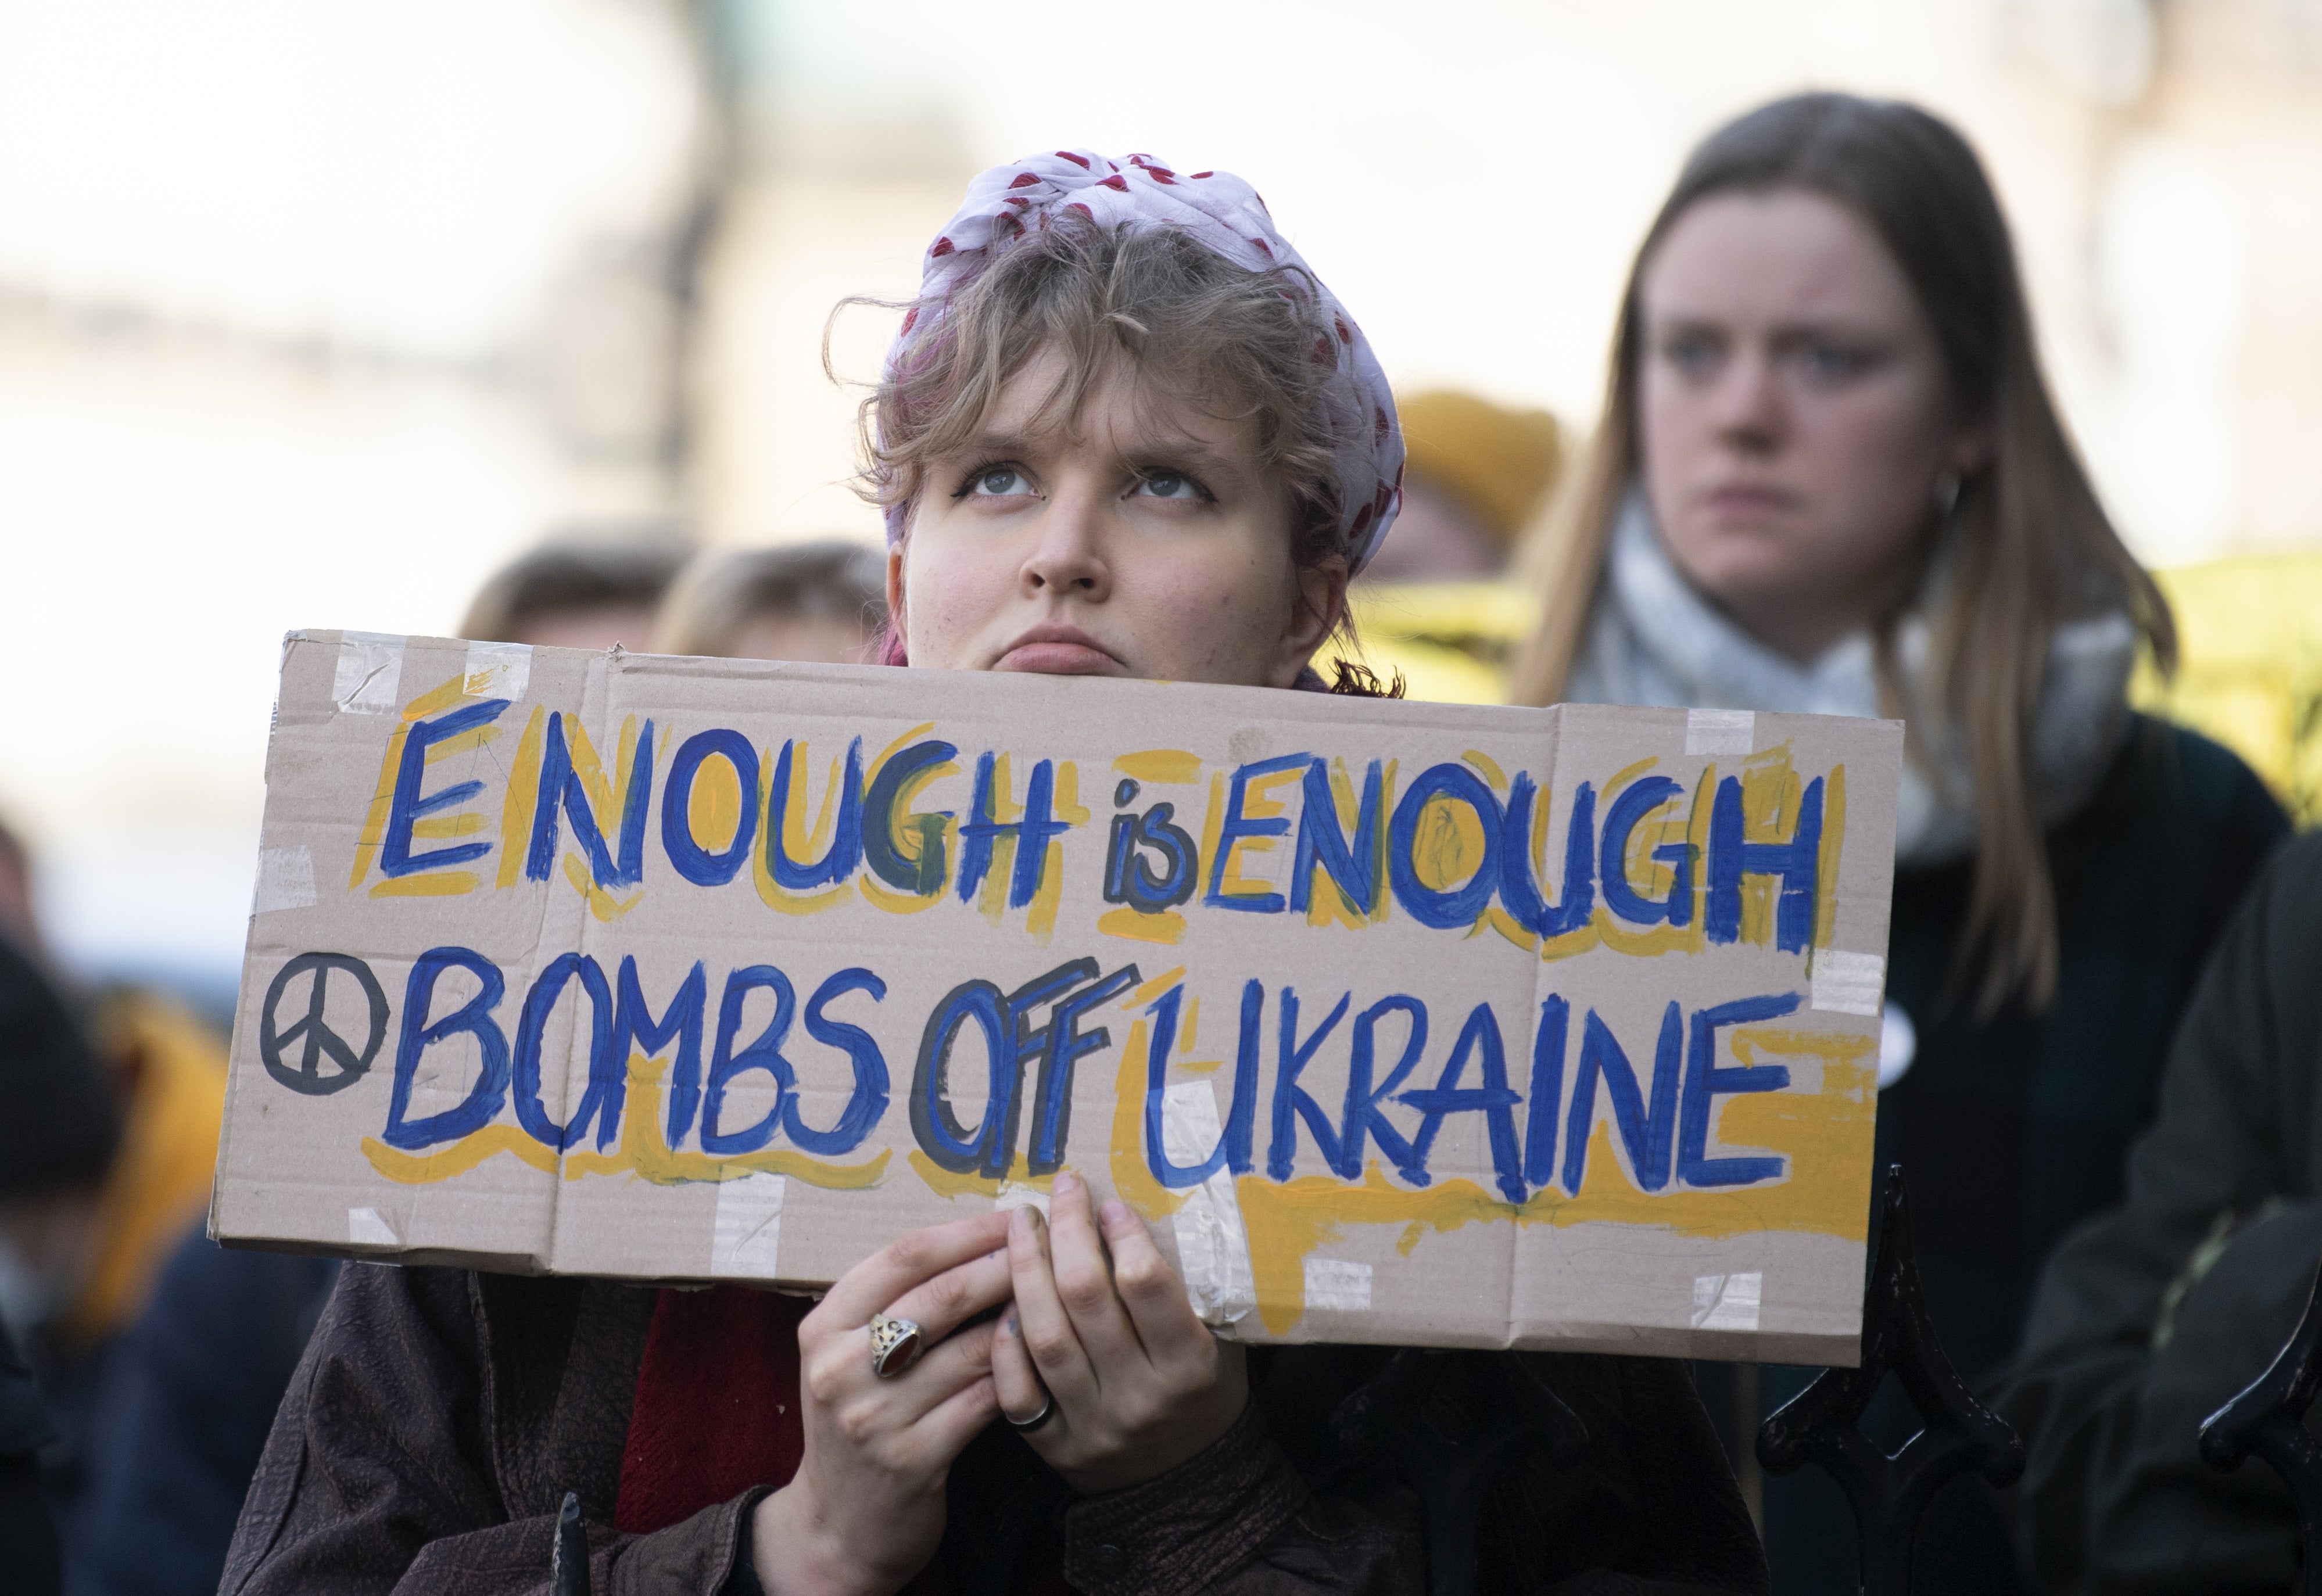 Protests have been taking place in Scotland against Russia’s invasion of Ukraine (Lesley Martin/PA)